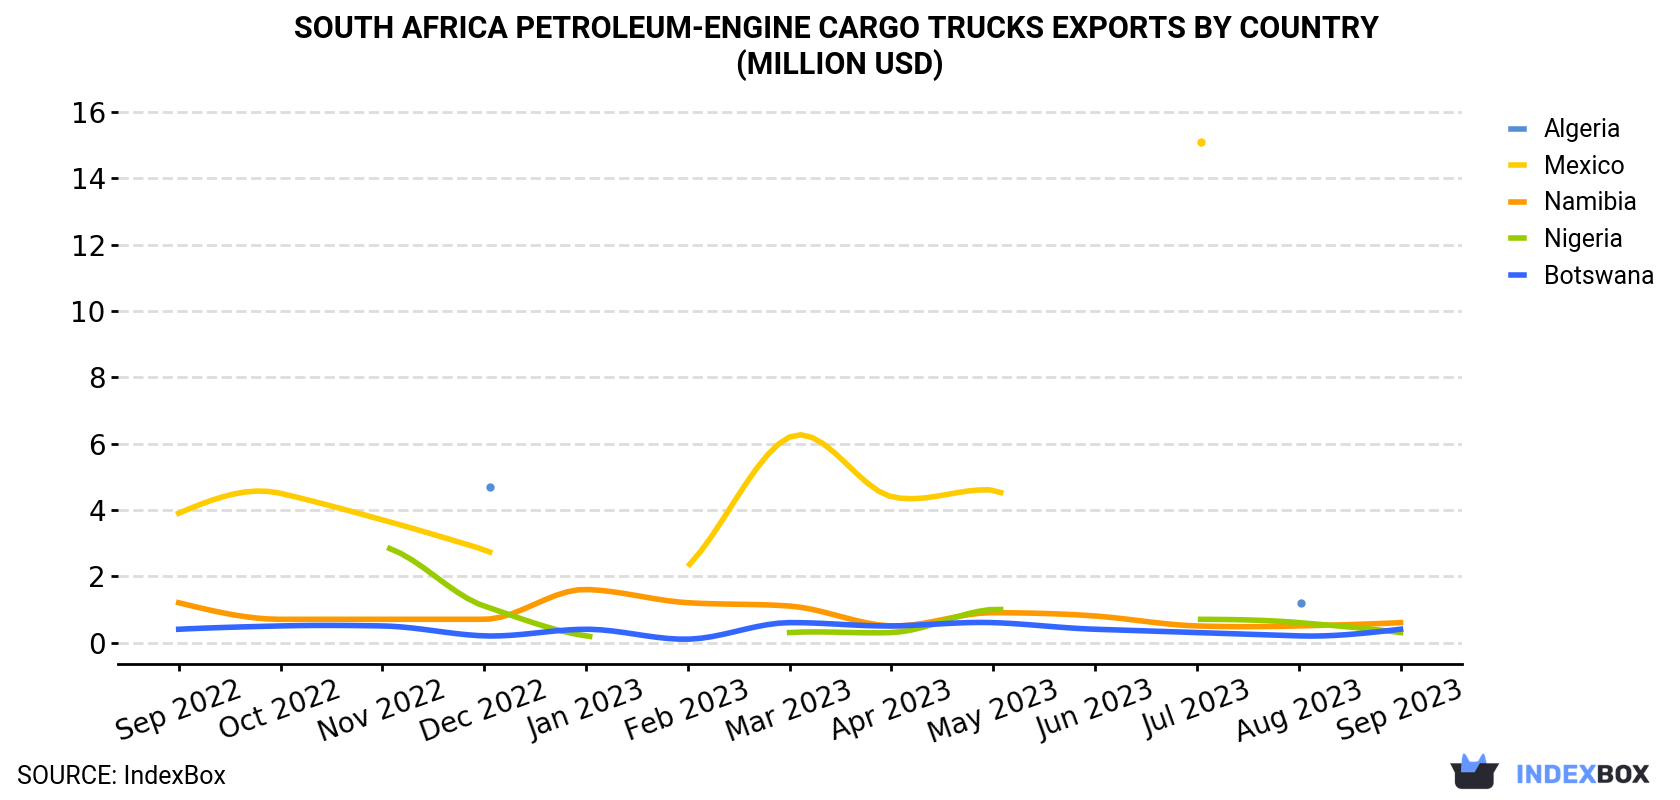 South Africa Petroleum-Engine Cargo Trucks Exports By Country (Million USD)